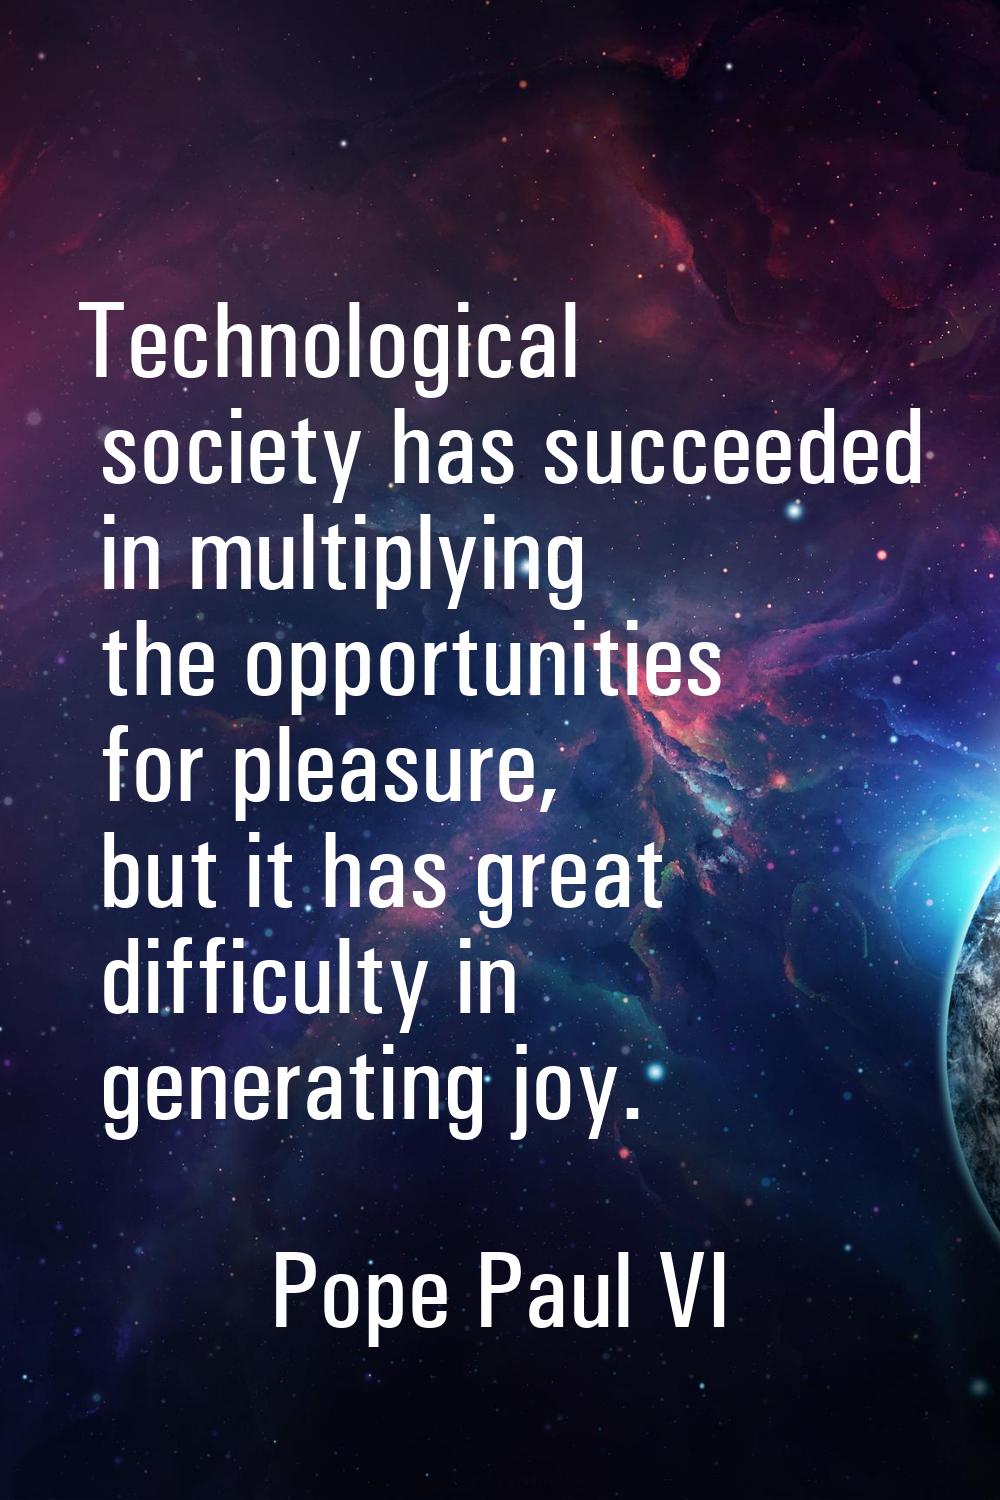 Technological society has succeeded in multiplying the opportunities for pleasure, but it has great